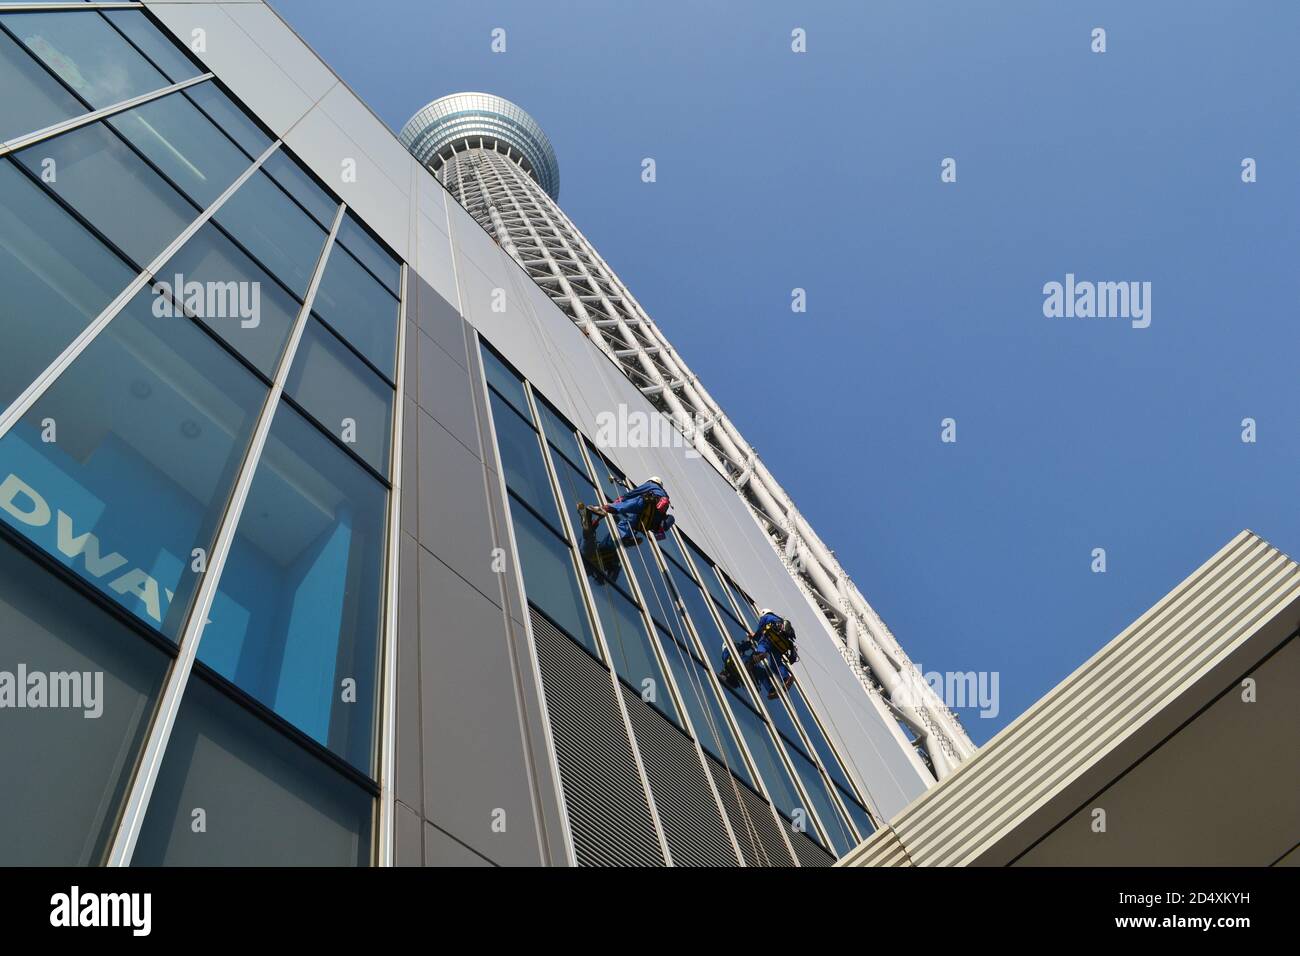 Tokyo, Japan-2/27/16: Two workers repelling down from one of the buildings attached to the Tokyo Sky Tree, interacting with the building's windows. Stock Photo